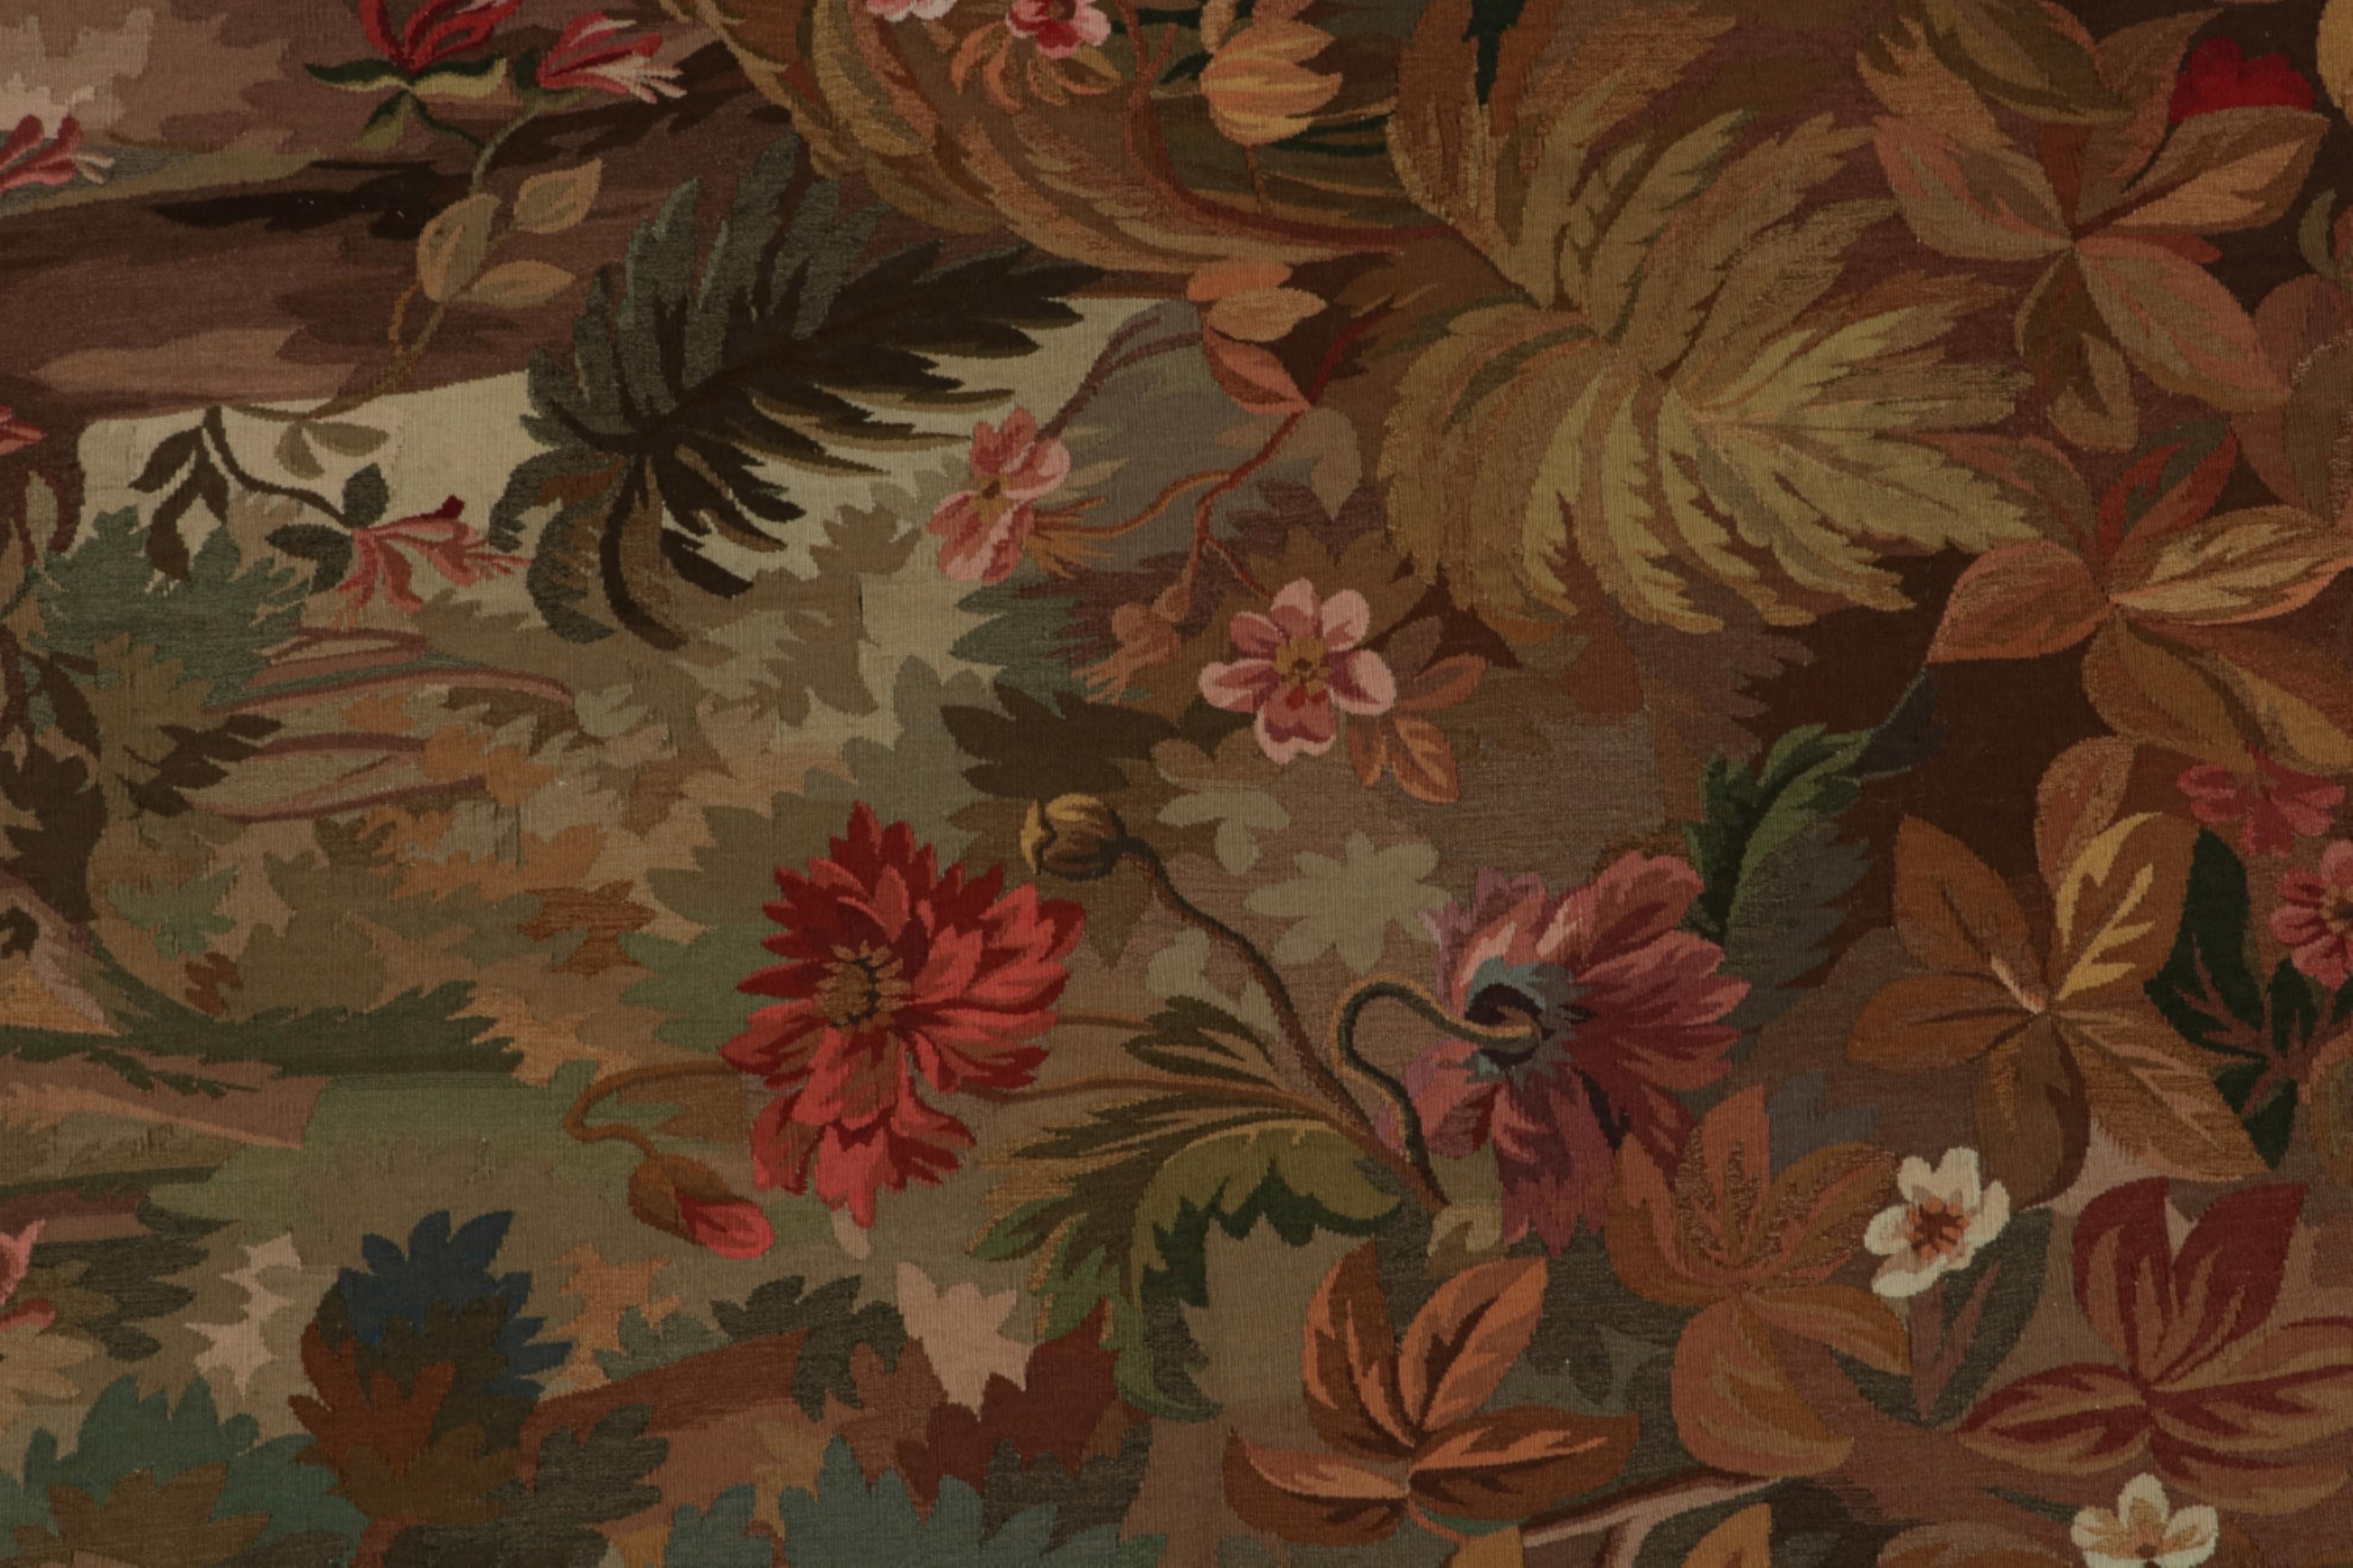 Contemporary Rug & Kilim’s Aubusson-Style Flatweave Rug in Brown with Rich Floral Pictorial For Sale